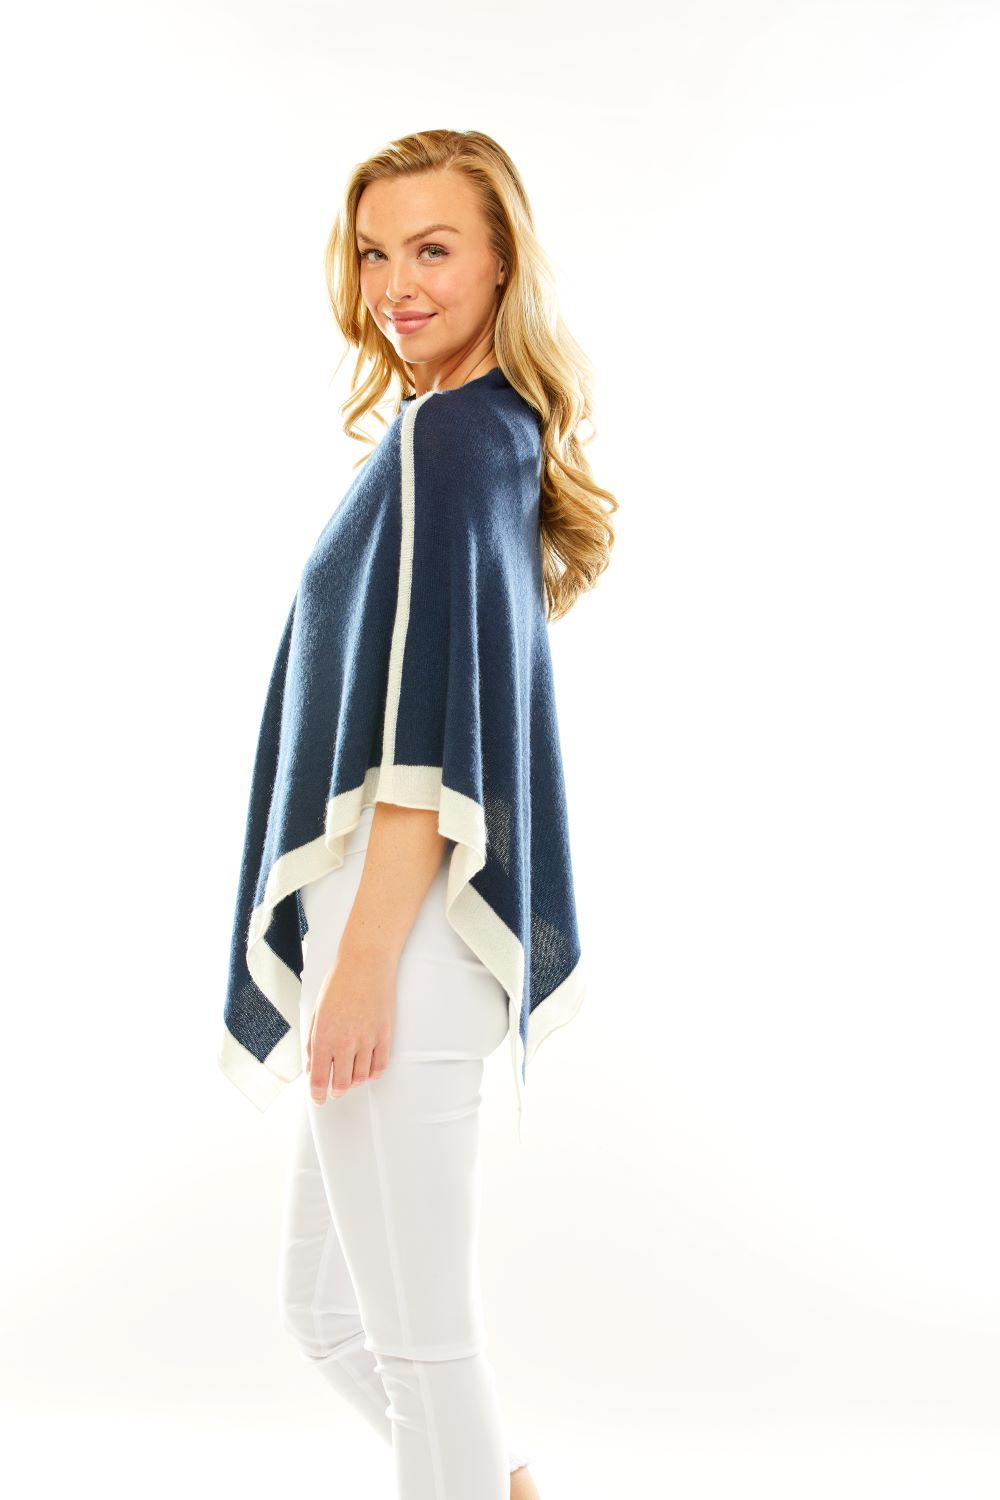 Woman in navy poncho